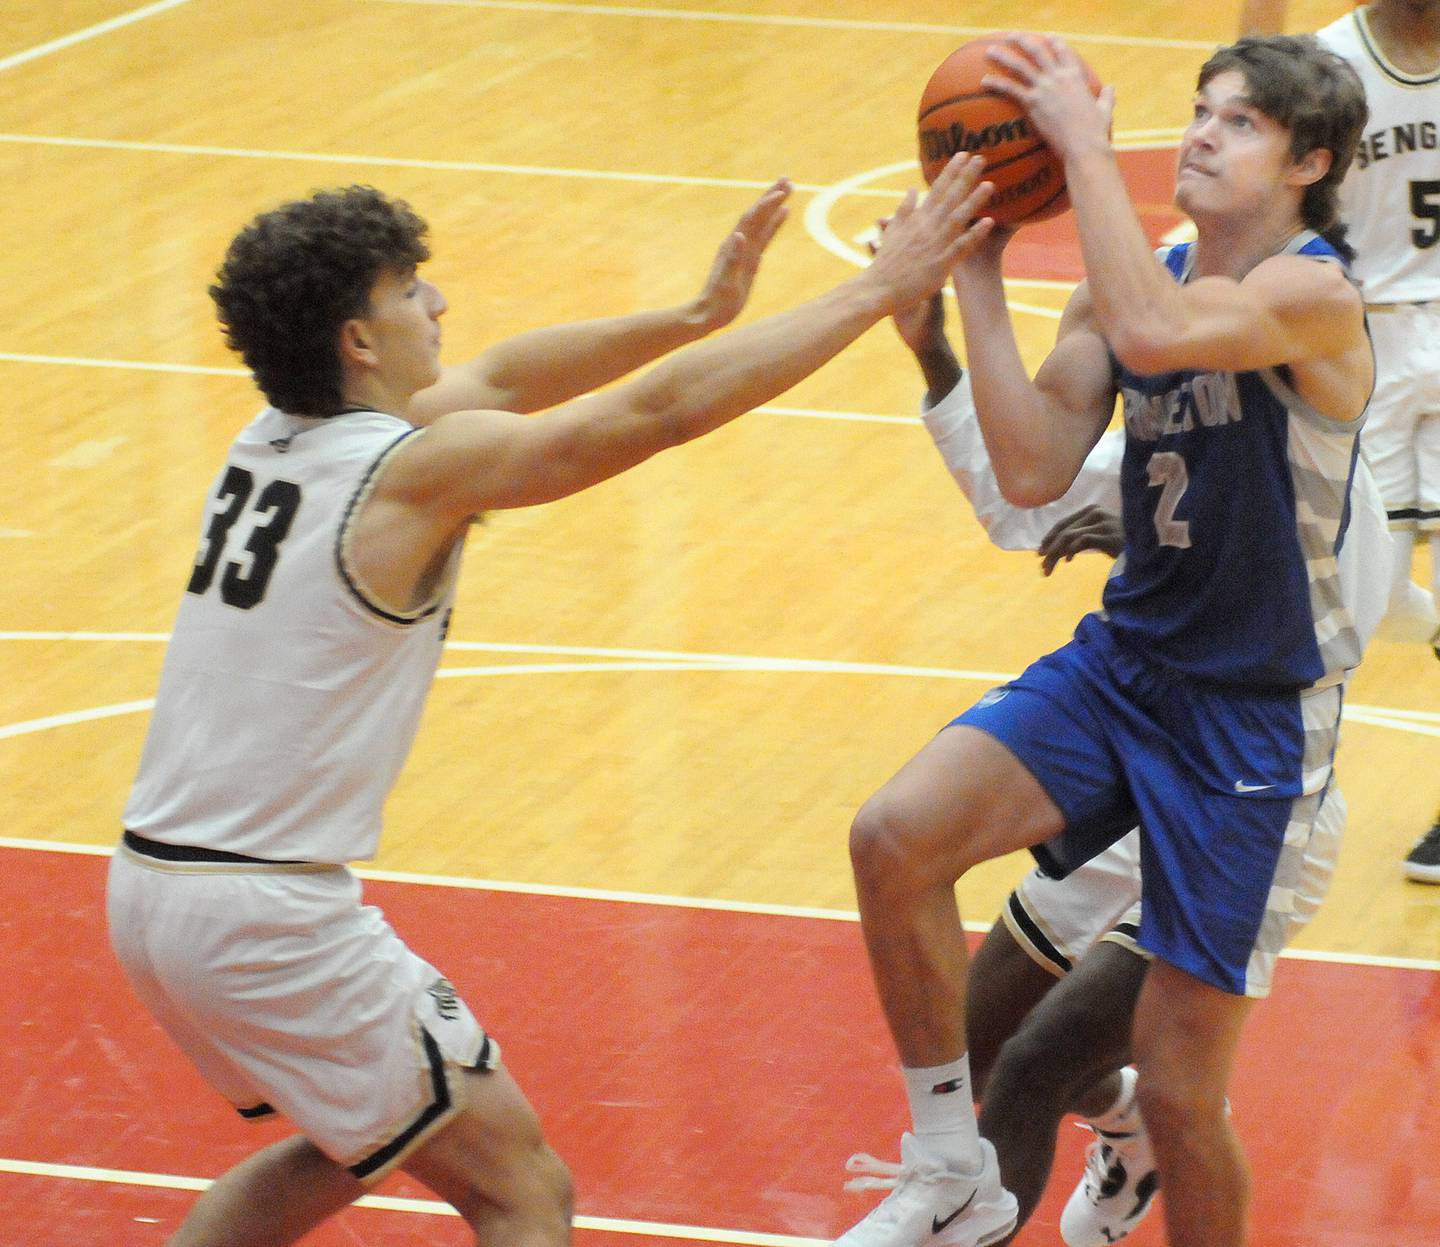 Princeton’s Teegan Davis goes over Oak Forest’s Mateo Gamboa for a basket in the opening quarter of Friday's final pool play game at the Dean Riley Shootin' The Rock Tournament at Kingman Gymnasium - 11/25/22